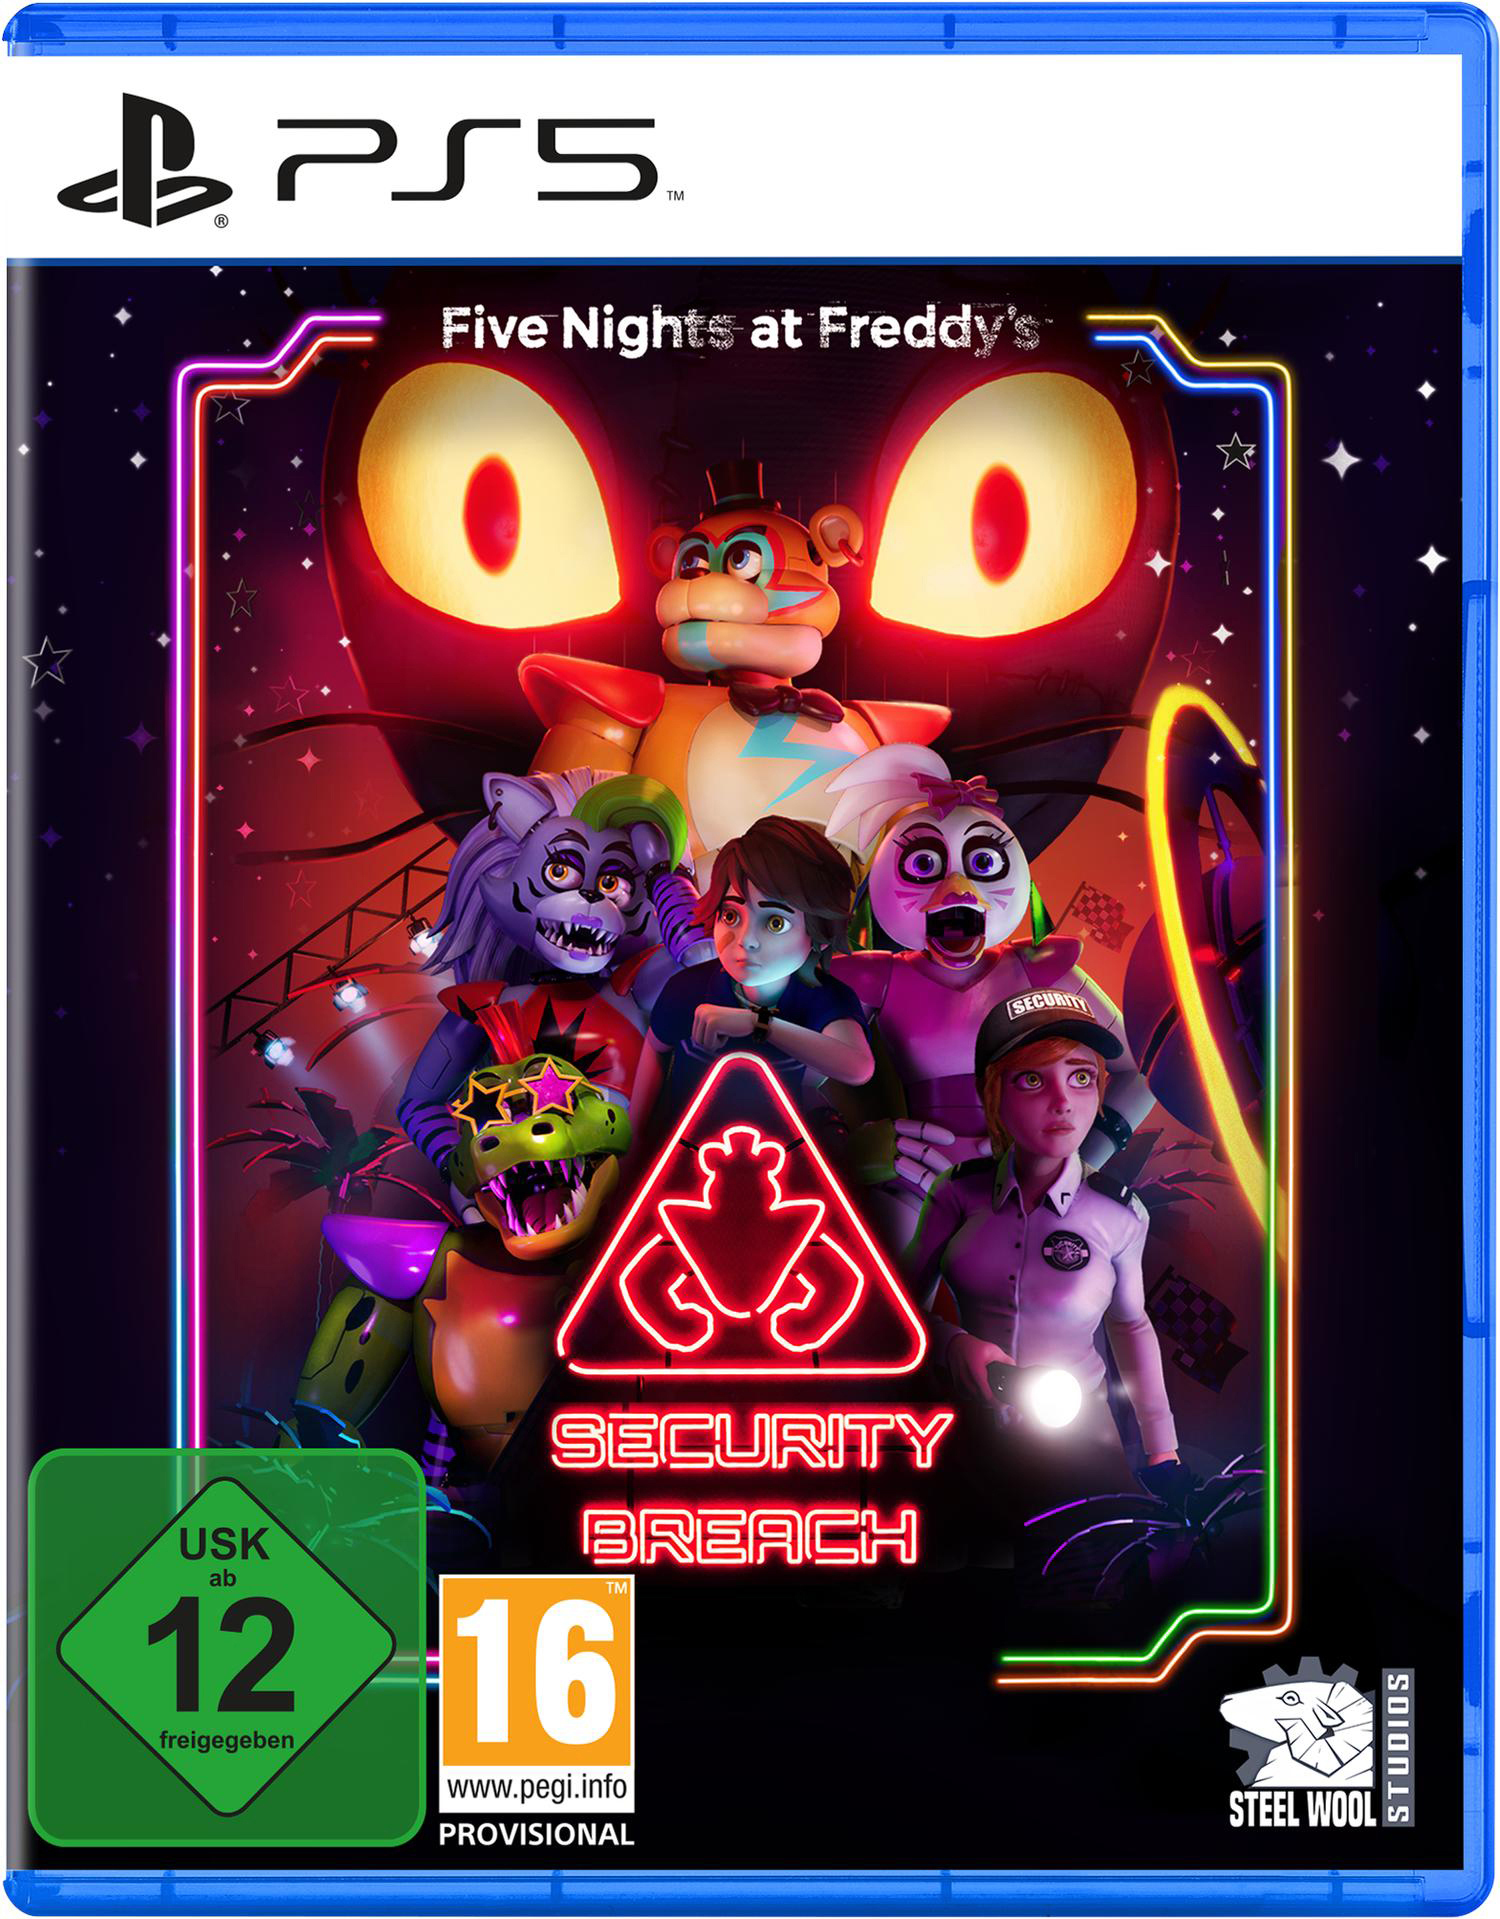 Nights Five Security 5] Breach - Freddy\'s: at [PlayStation